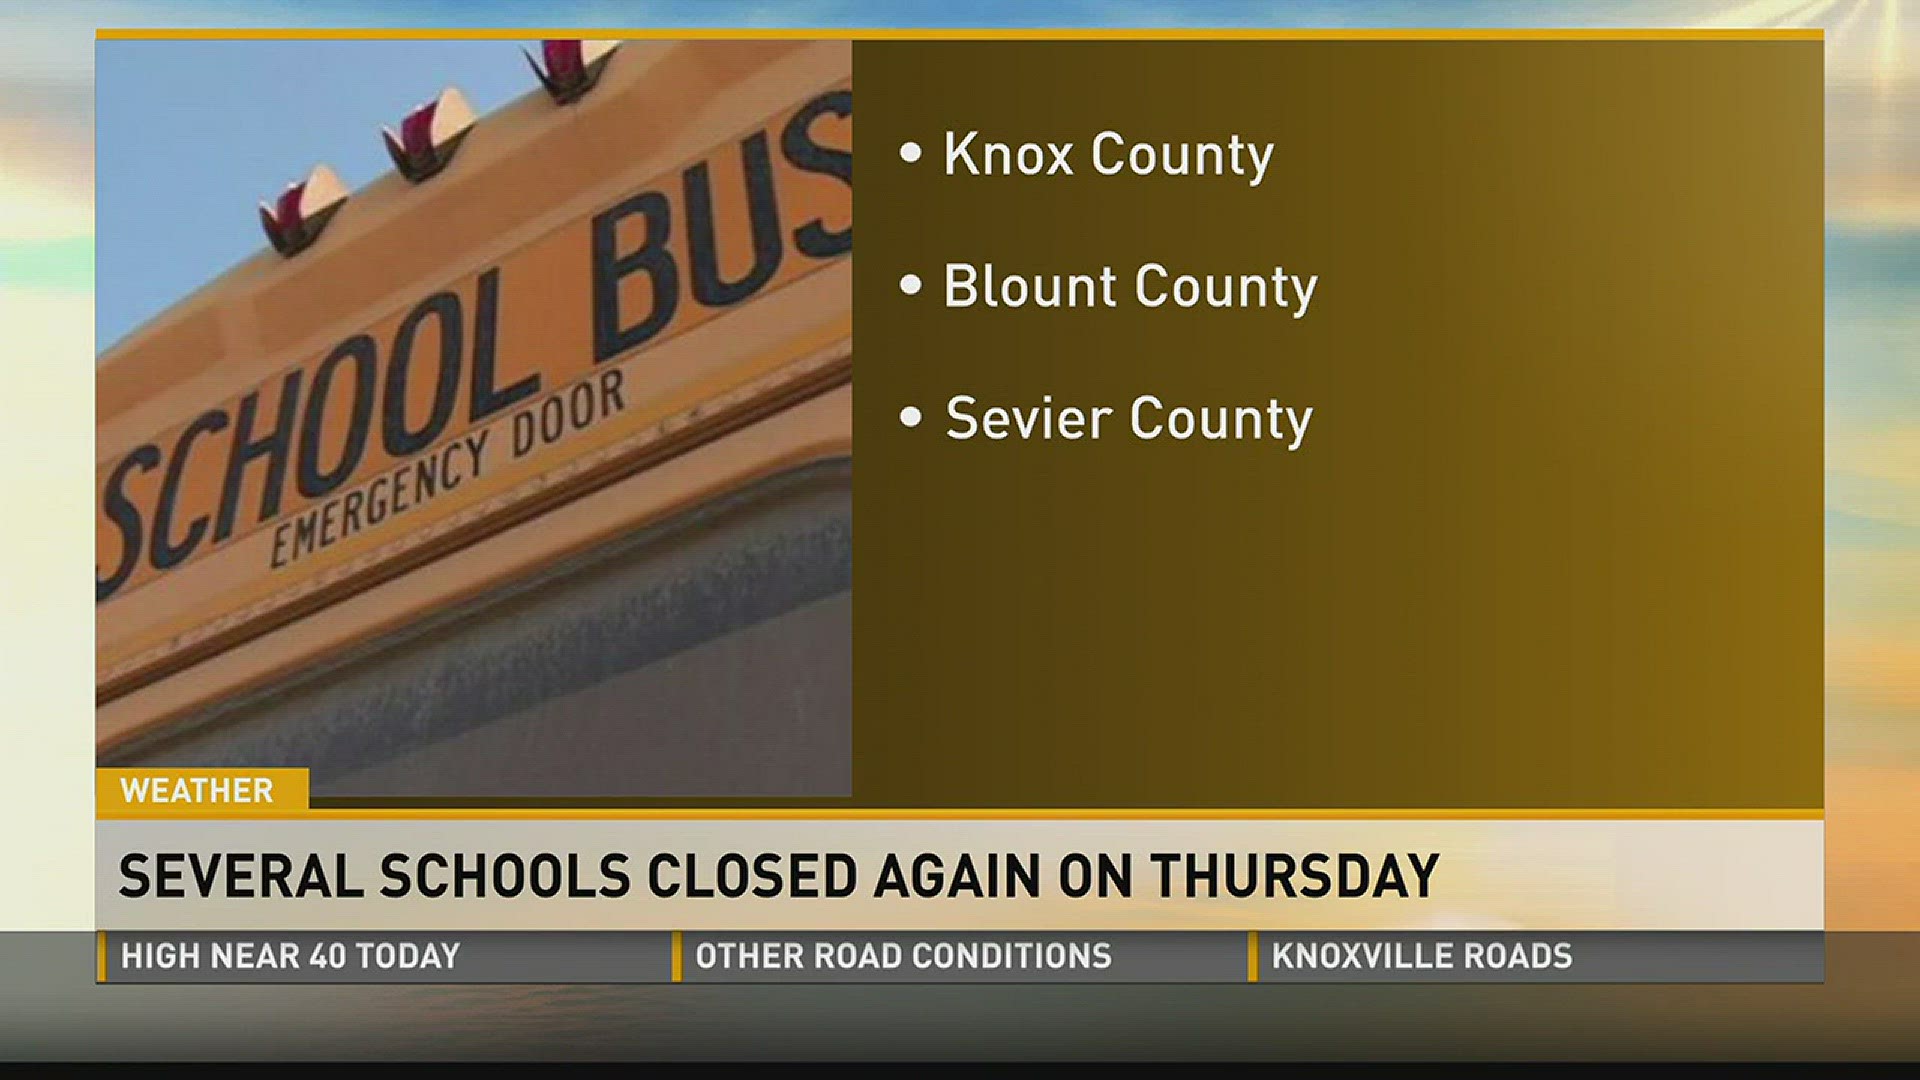 More than 280 schools and businesses are closed across East Tennessee Thursday.